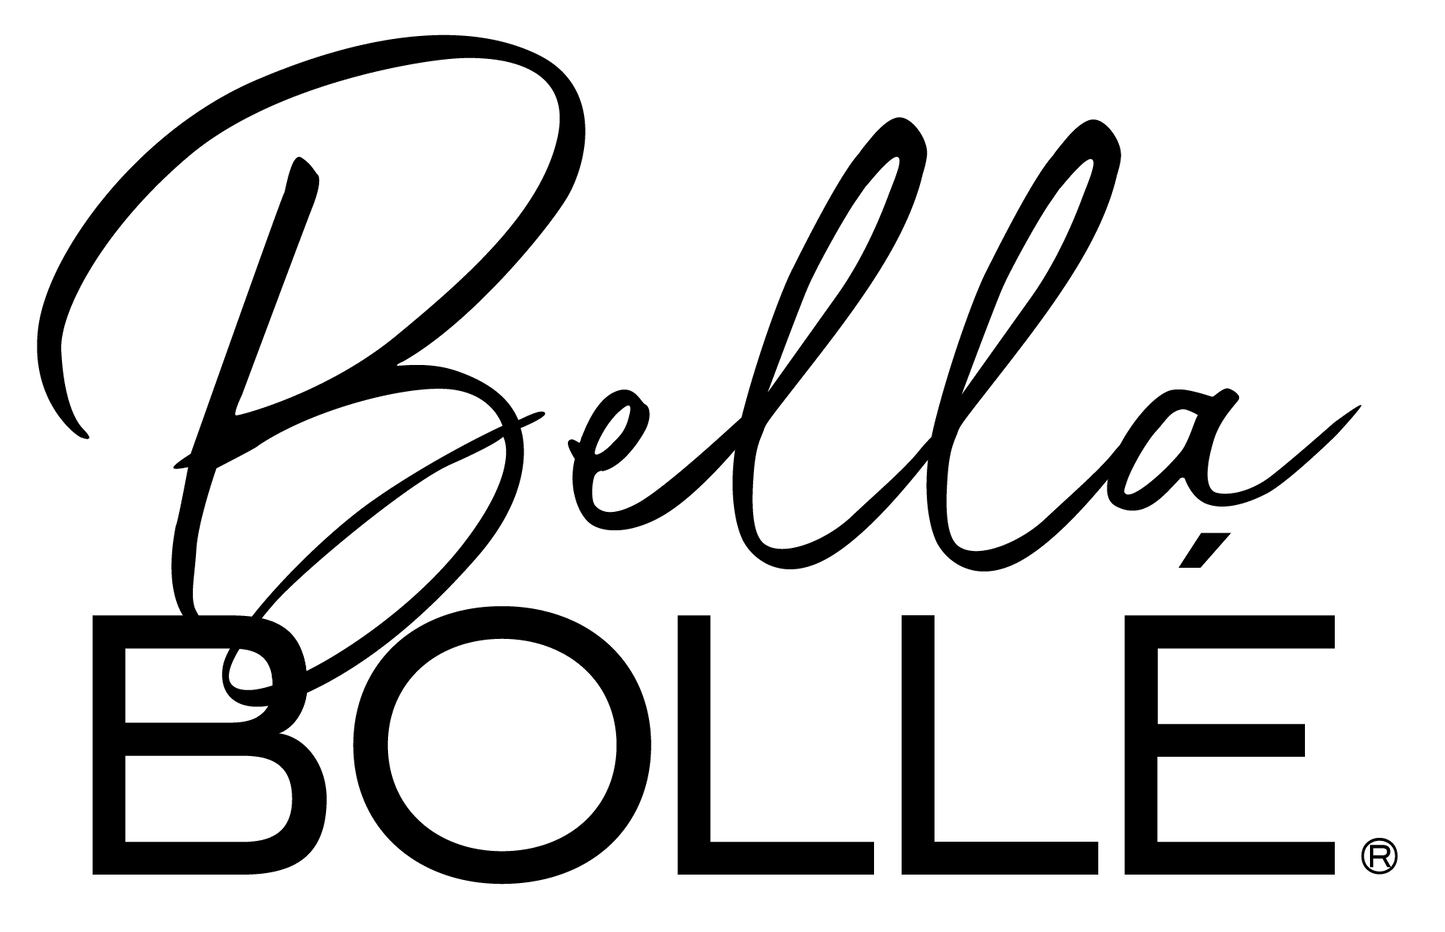 Bella Bolle Moscato, Italy, 1.5l Glass Bottle, 6-240ml Servings